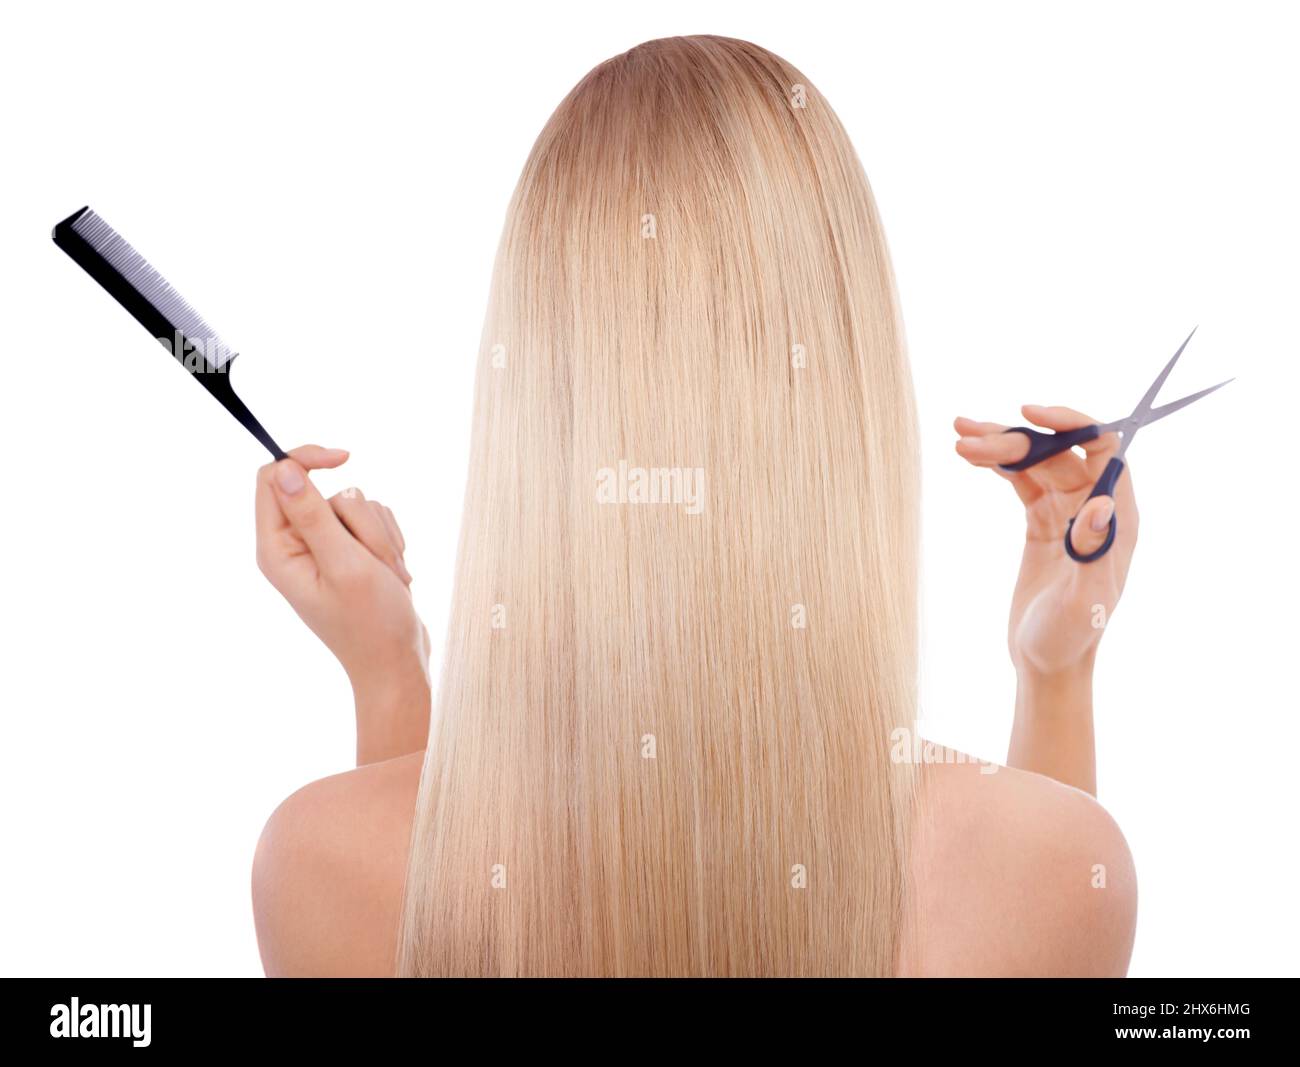 Ready for a haircut. Rearview shot of a blonde woman holding scissors and a comb. Stock Photo